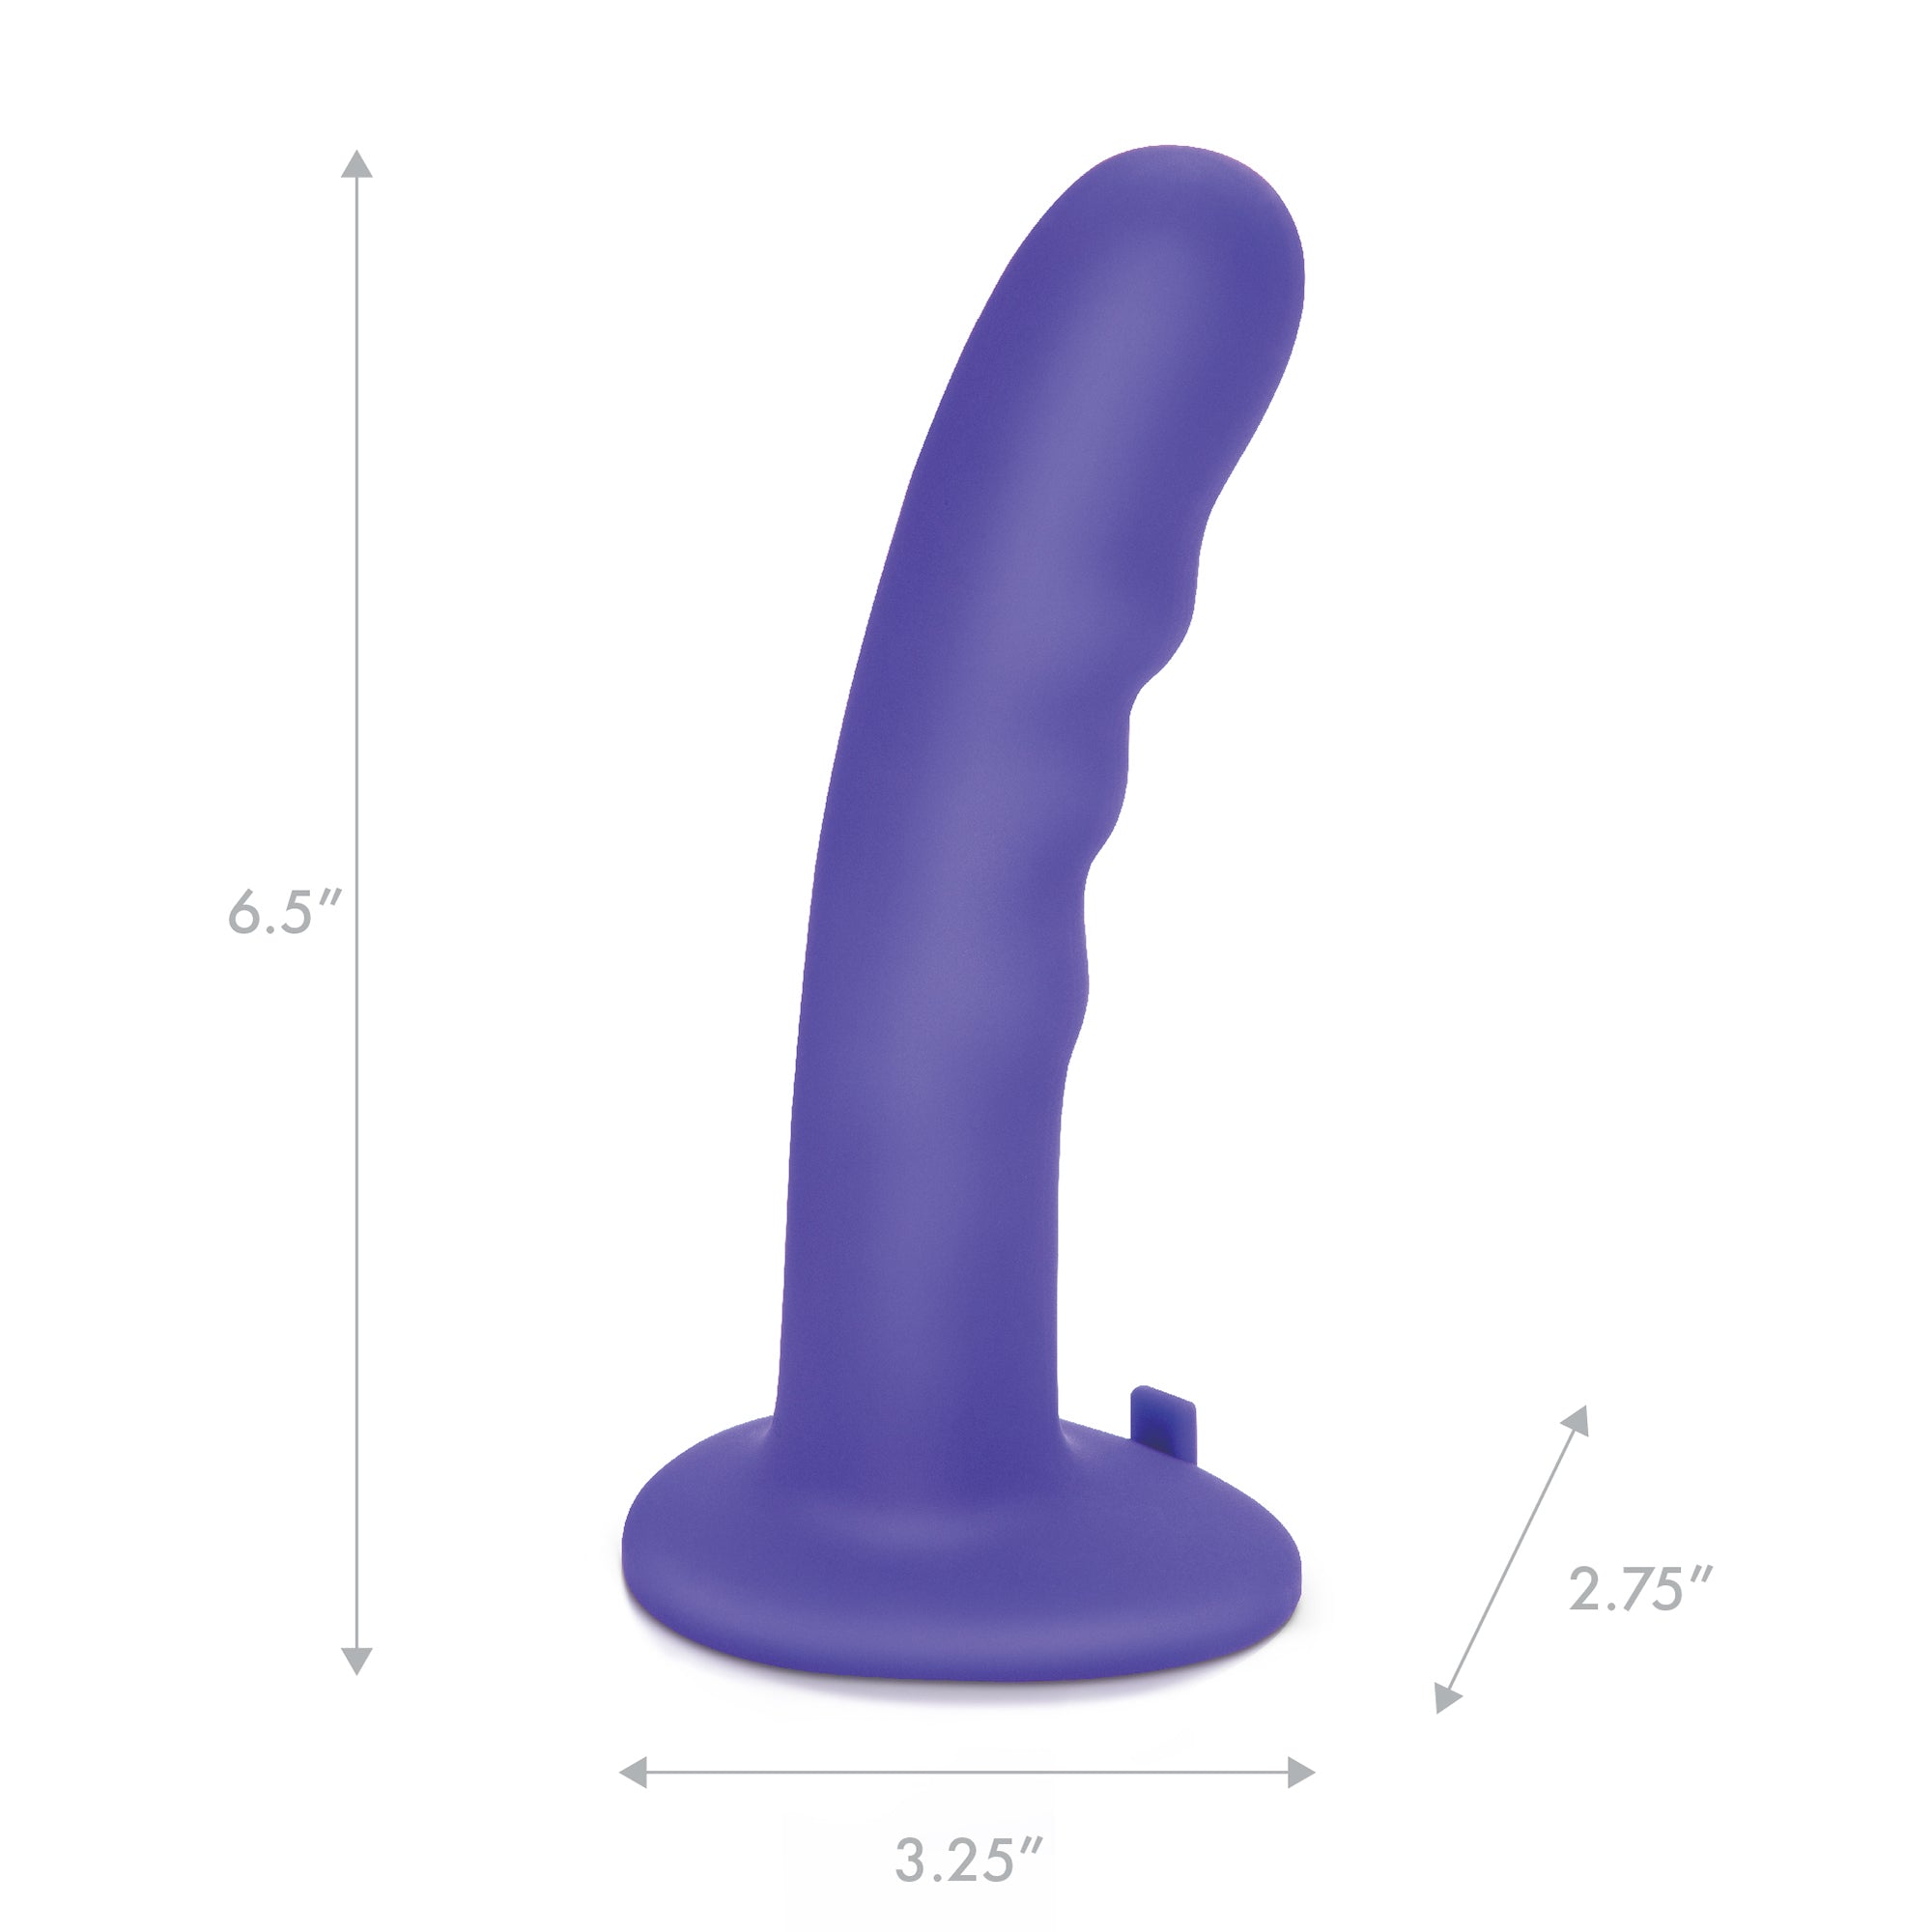 6" Curved Wave Silicone Peg with Harness included